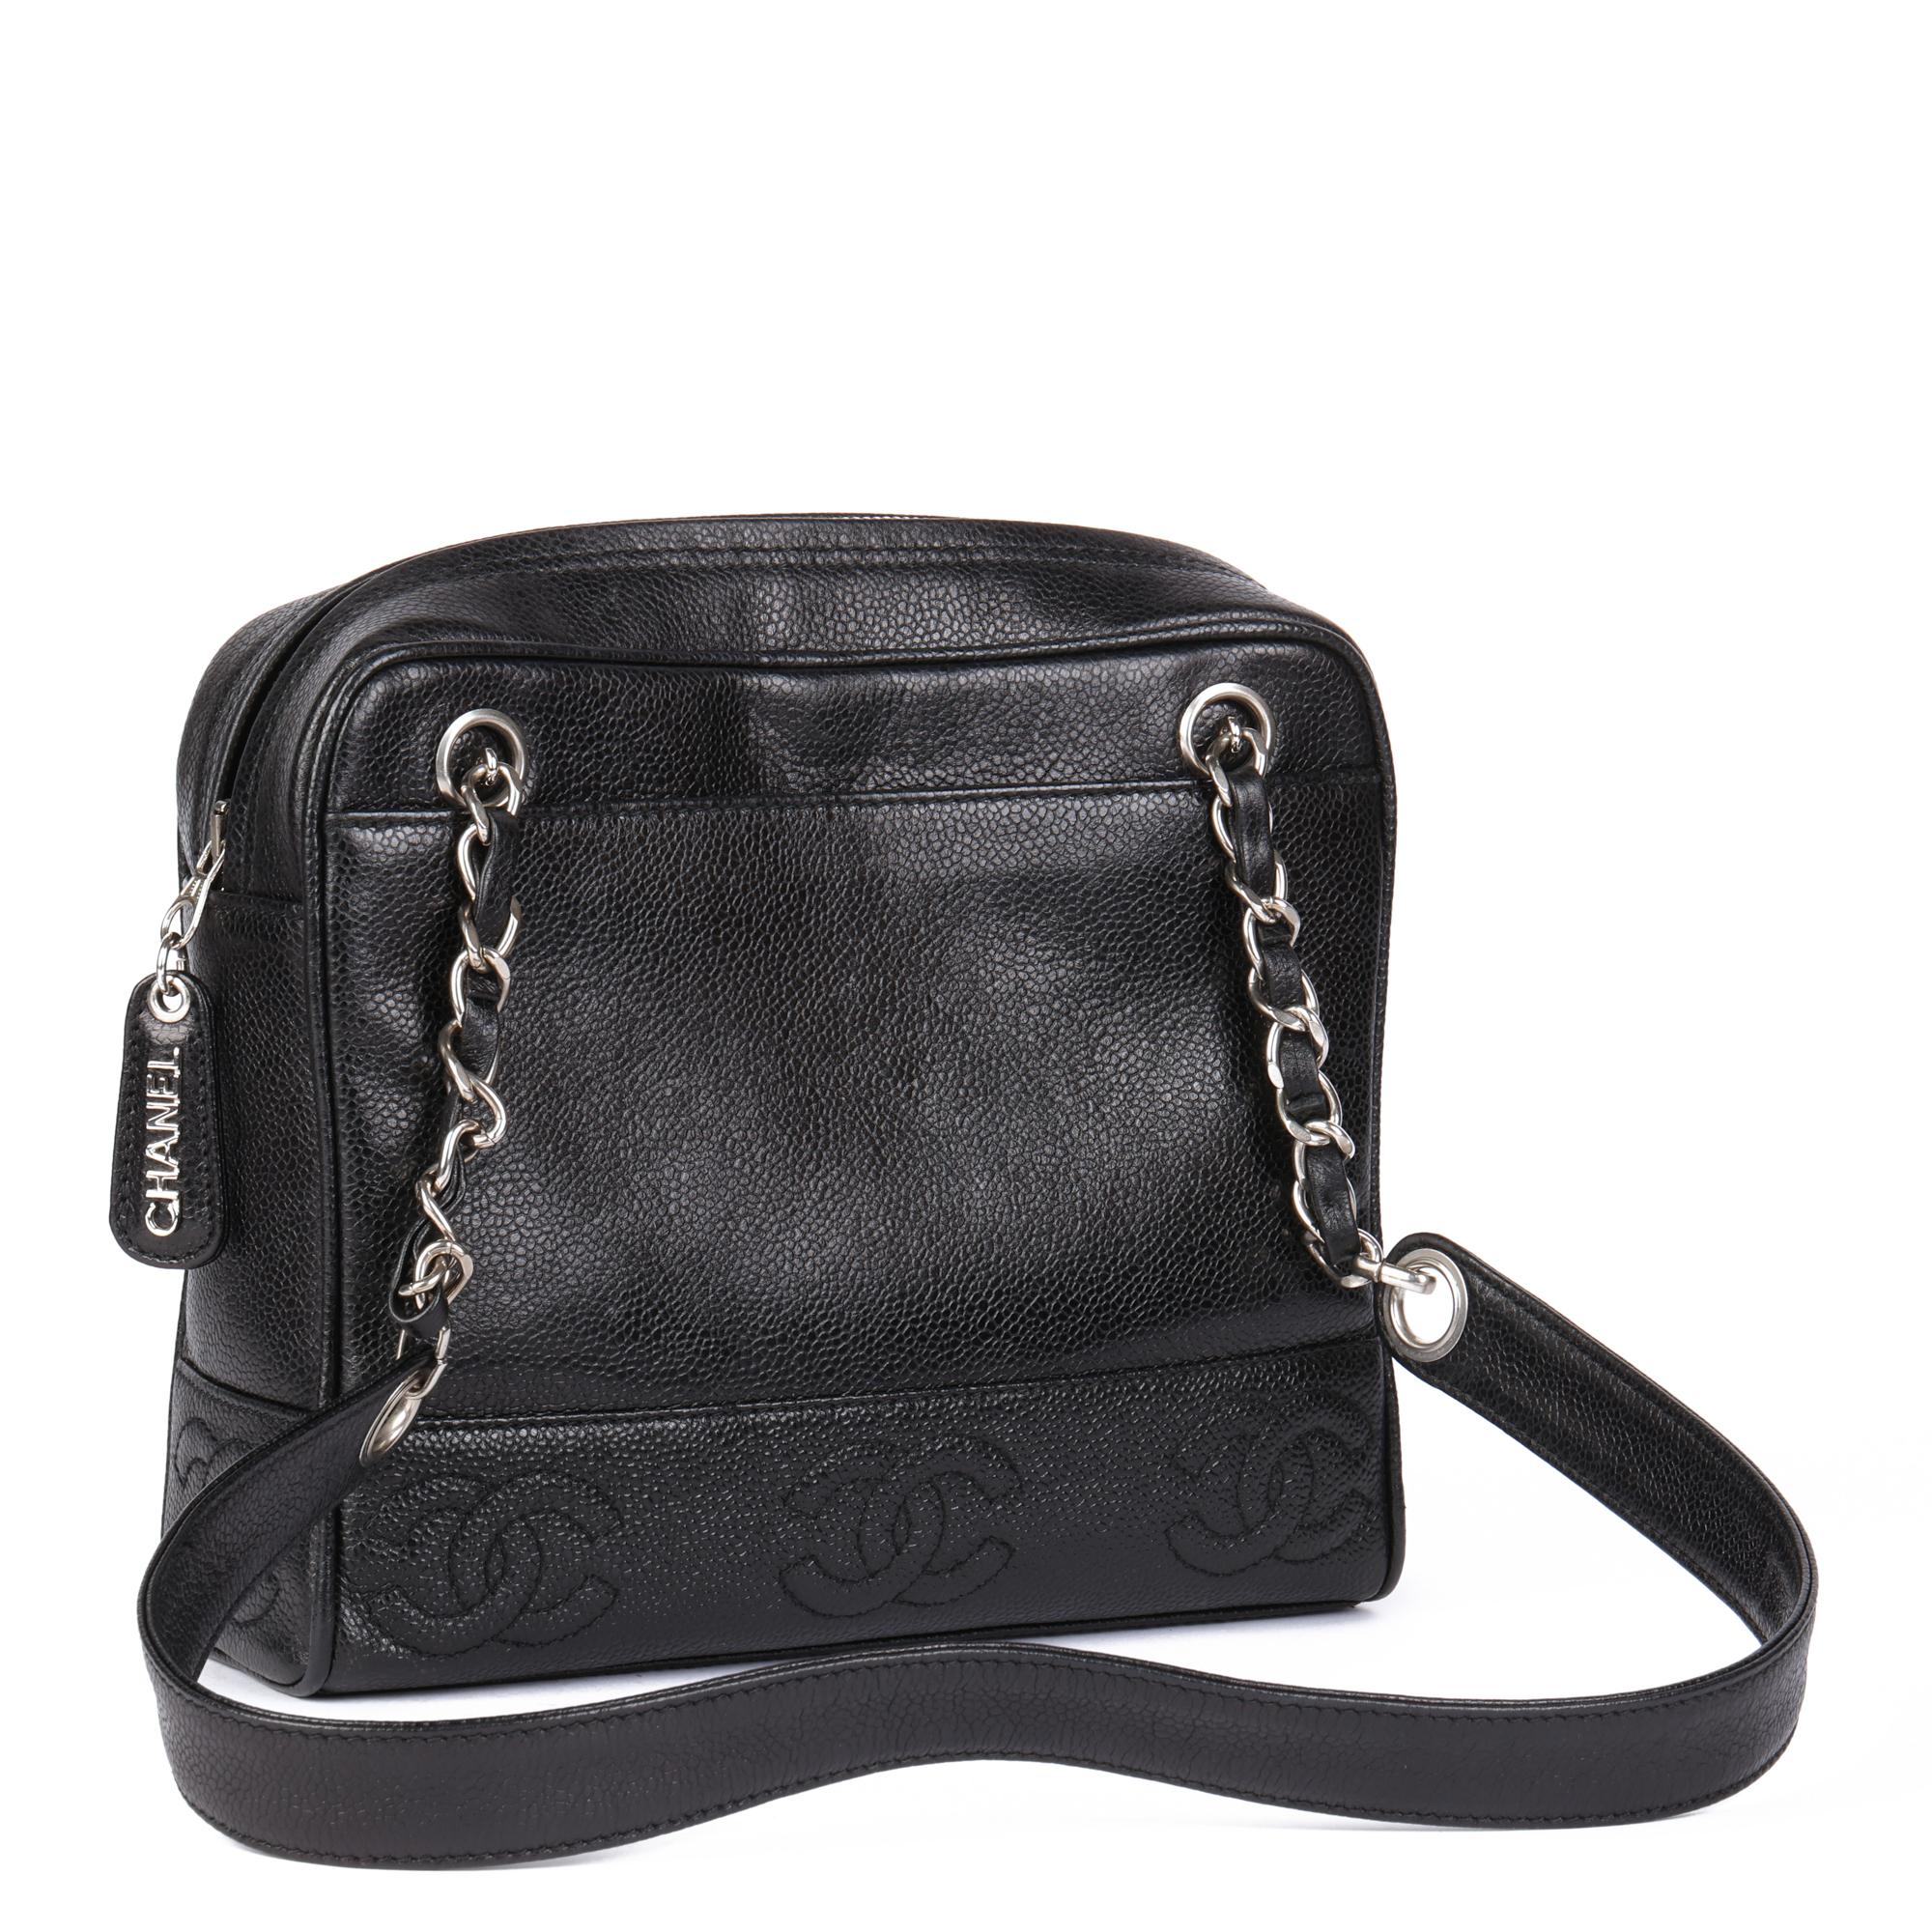 CHANEL
Black Caviar Leather Vintage Timeless Logo Trim Shoulder Bag 

Serial Number: 4558290
Age (Circa): 1990
Accompanied By: Chanel Dust Bag, Authenticity Card, Box, Care Booklet
Authenticity Details: Authenticity Card, Serial Sticker (Made in